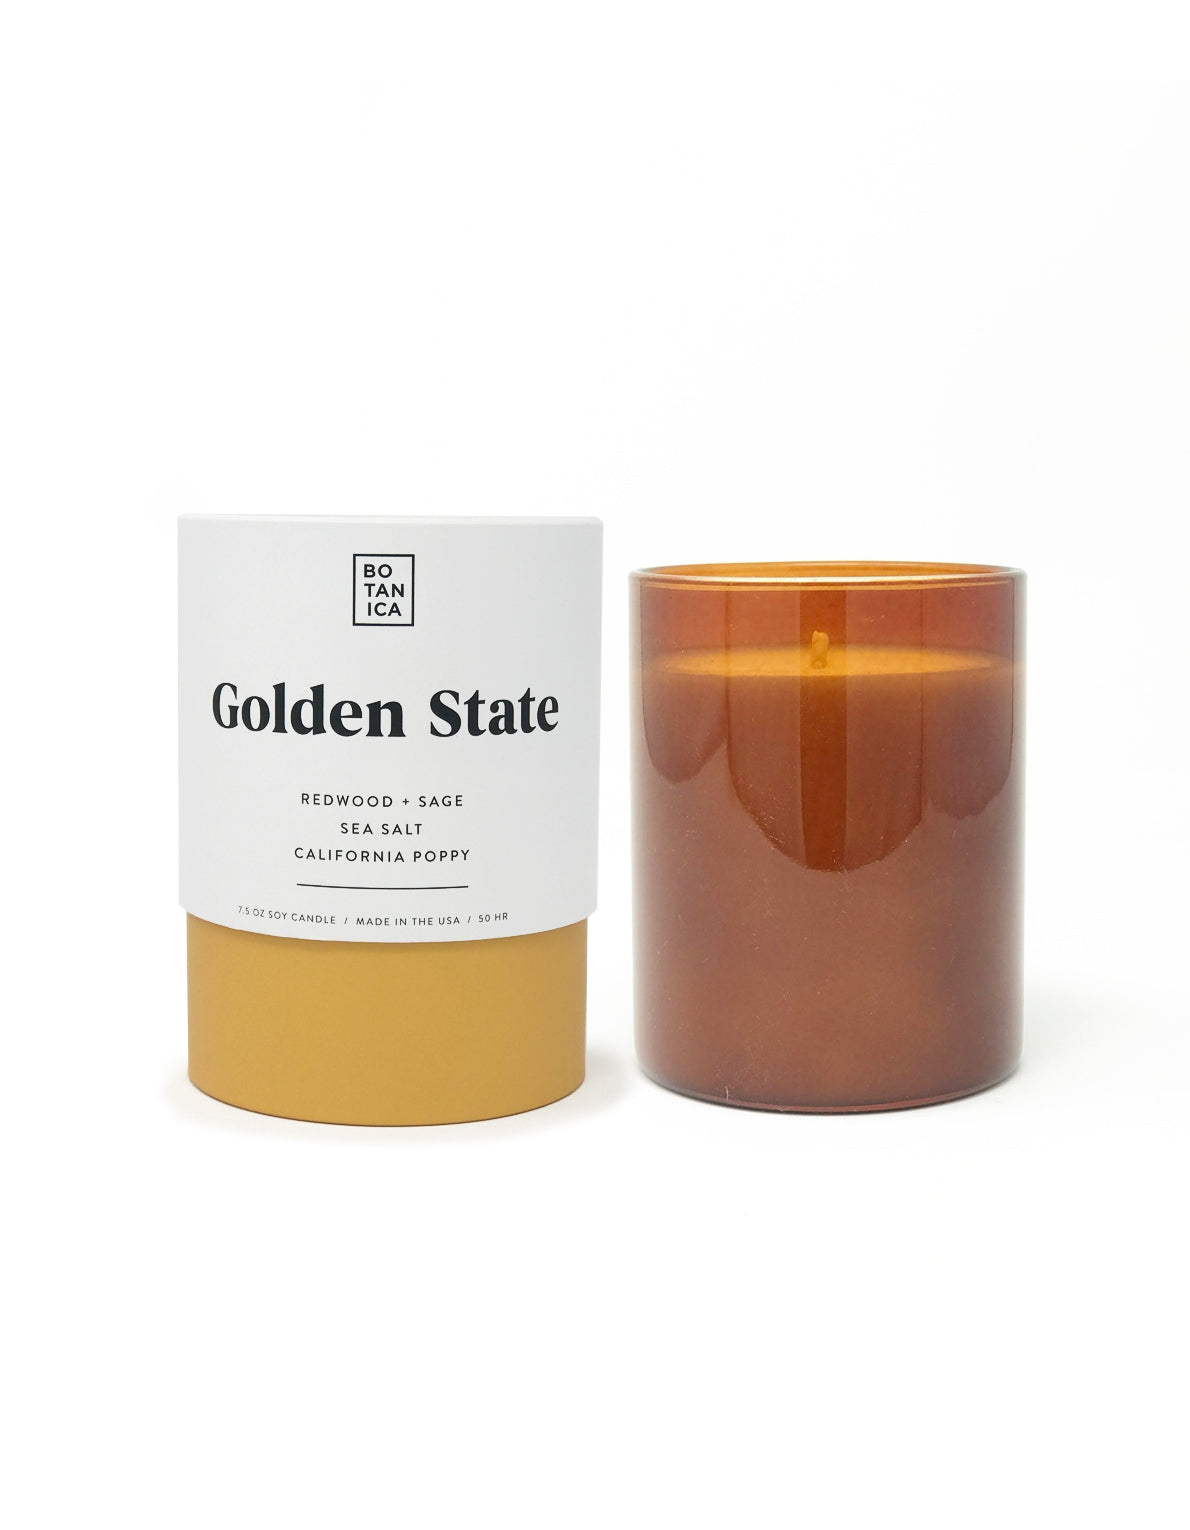 Botanica's 7.5 oz soy wax candle with scent notes of California poppy, redwood, sage, and sea salt.